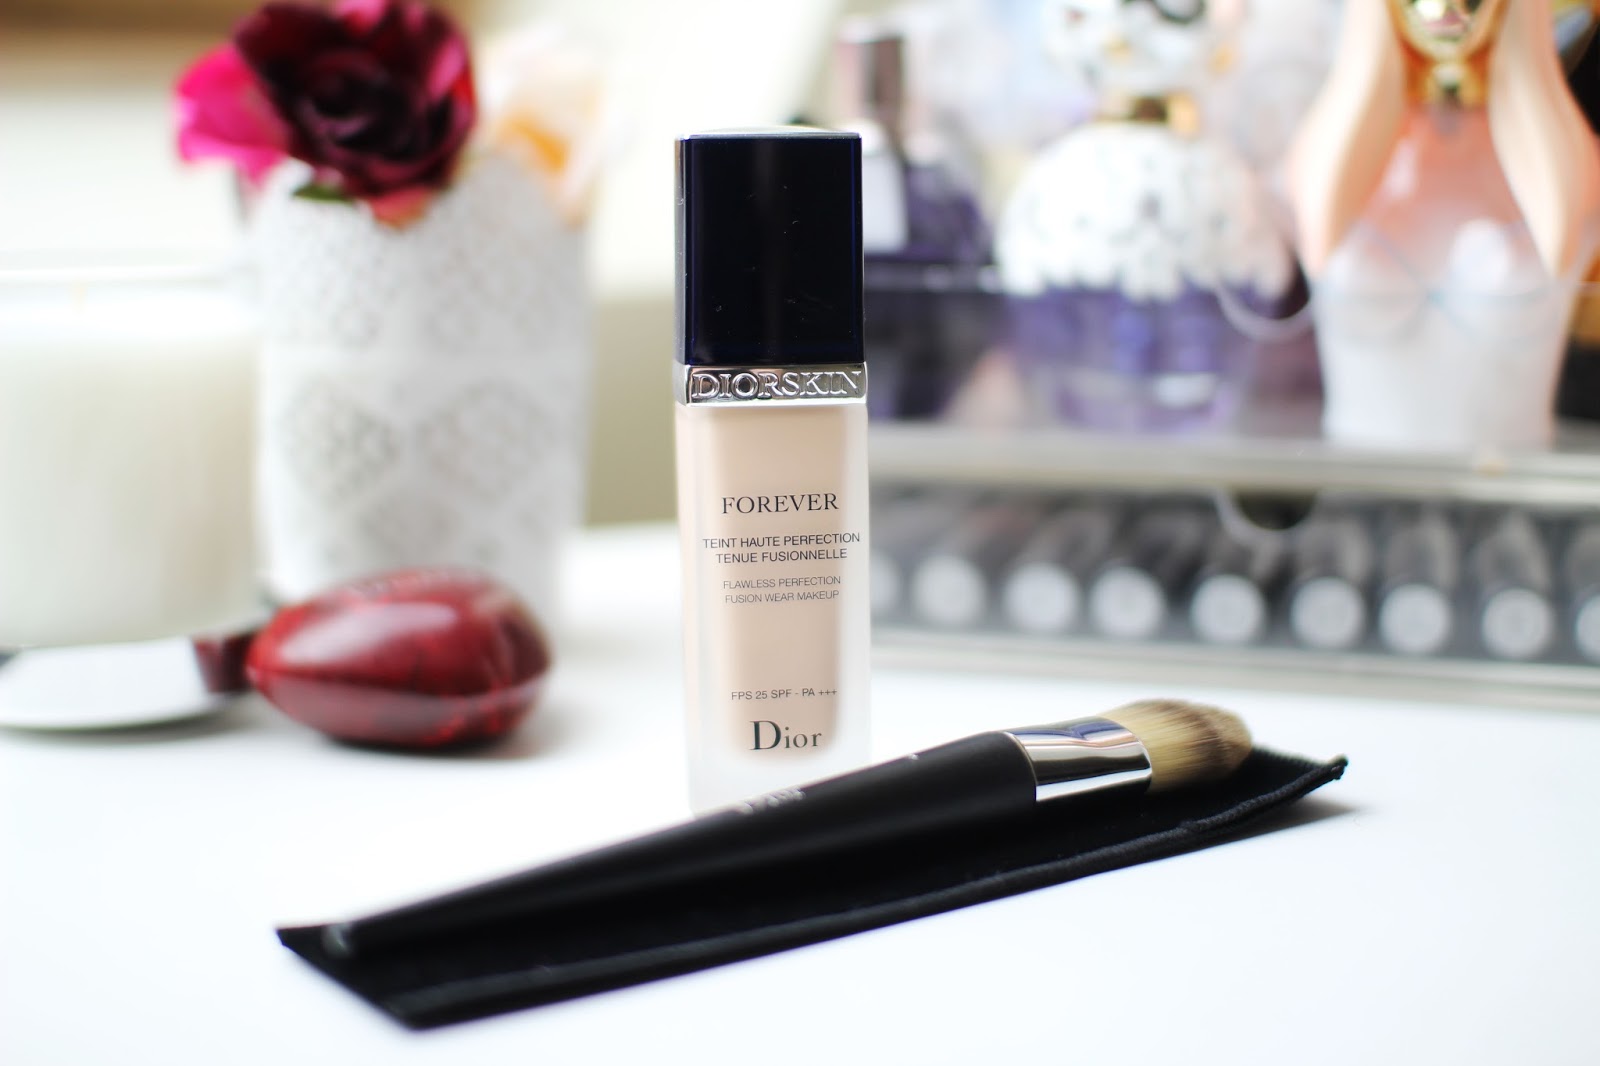 Dior Forever Foundation and Foundation Brush